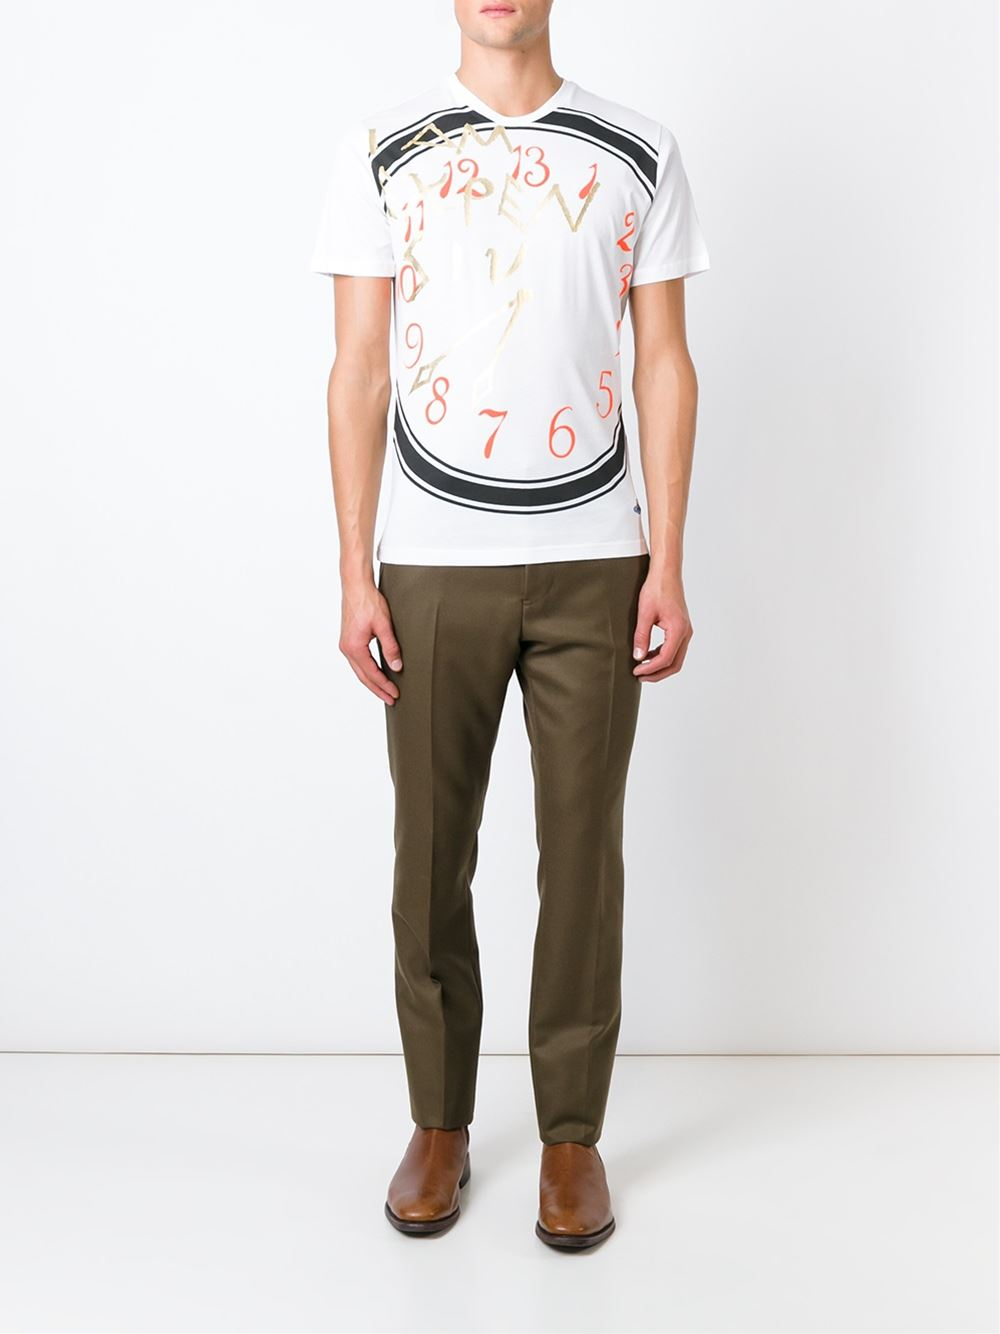 Vivienne Westwood 'i Am Expensive' T-shirt in White for Men - Lyst